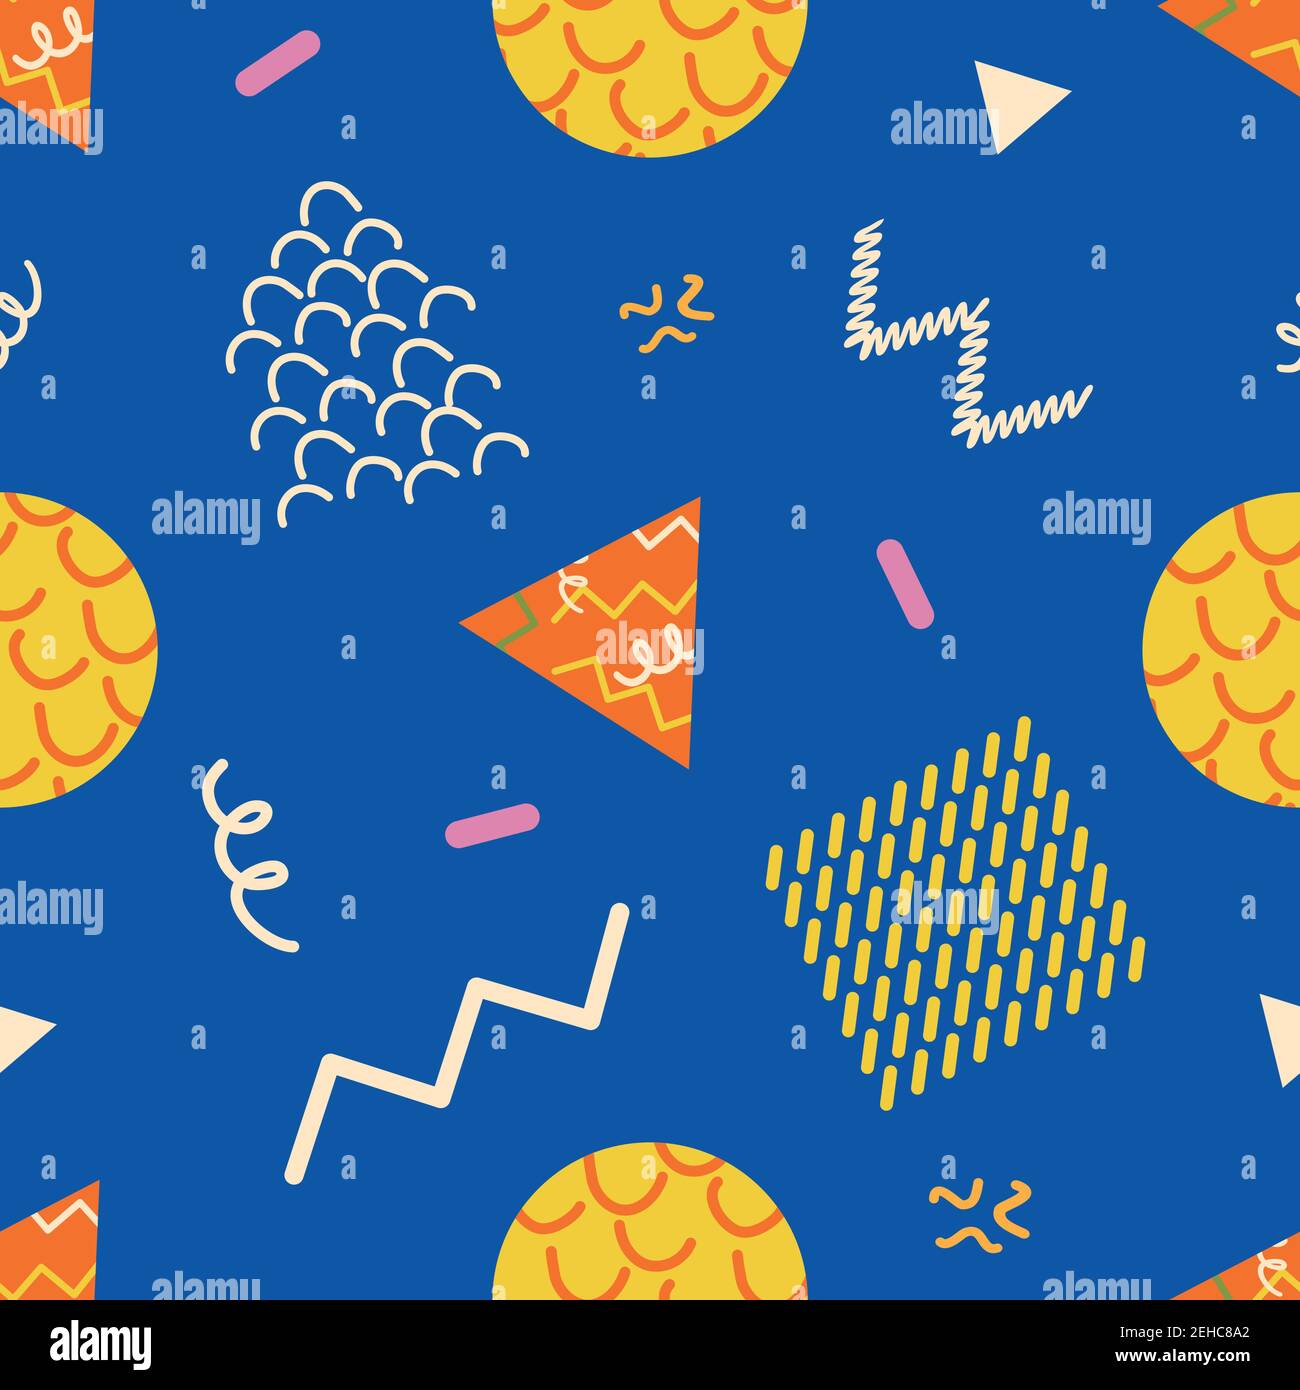 Memphis seamless pattern with geometric shapes Vector Image